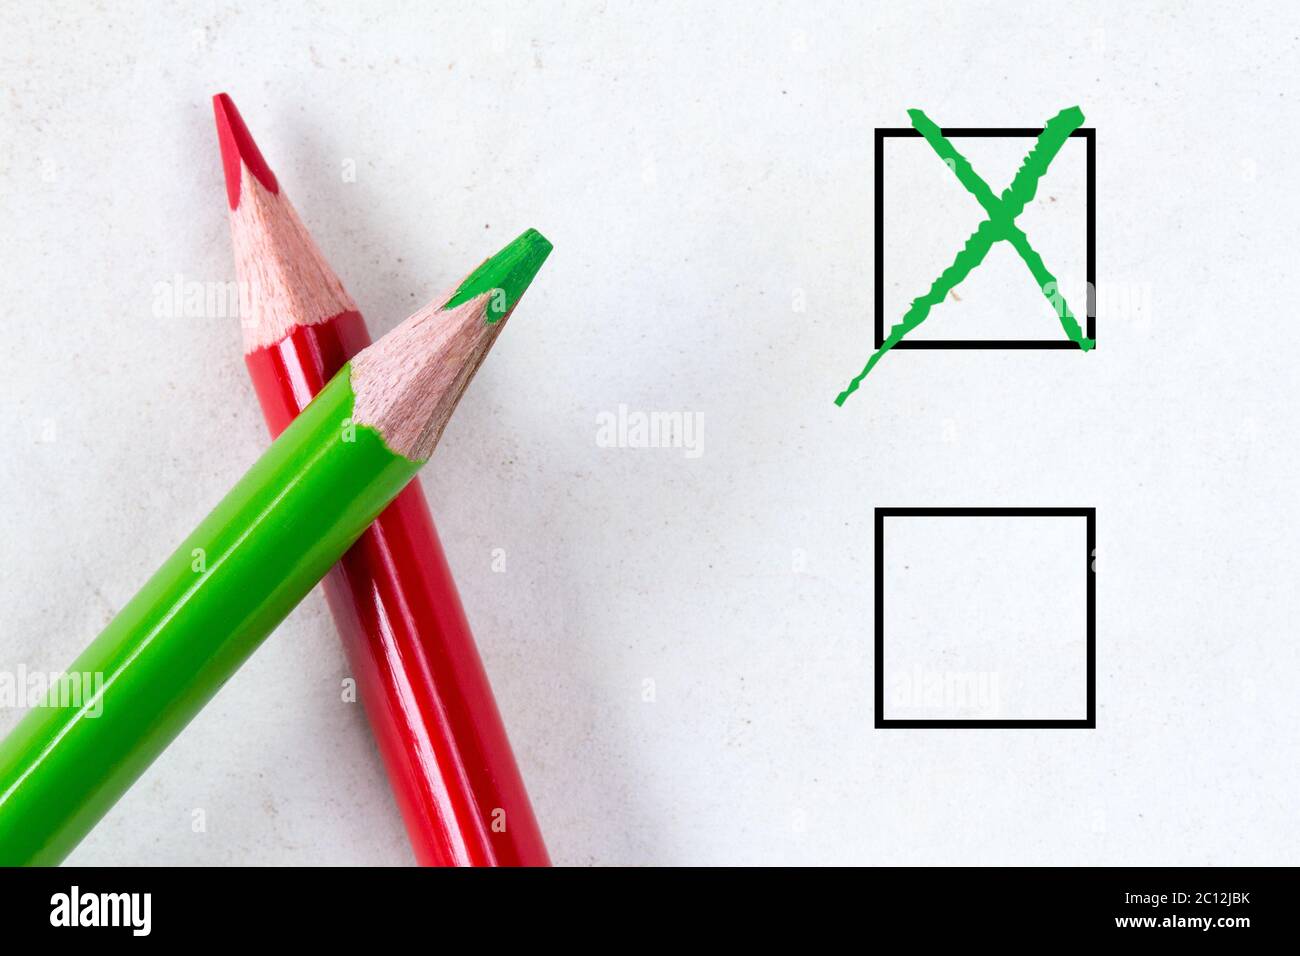 Green and red pencils with marking checkbox Stock Photo